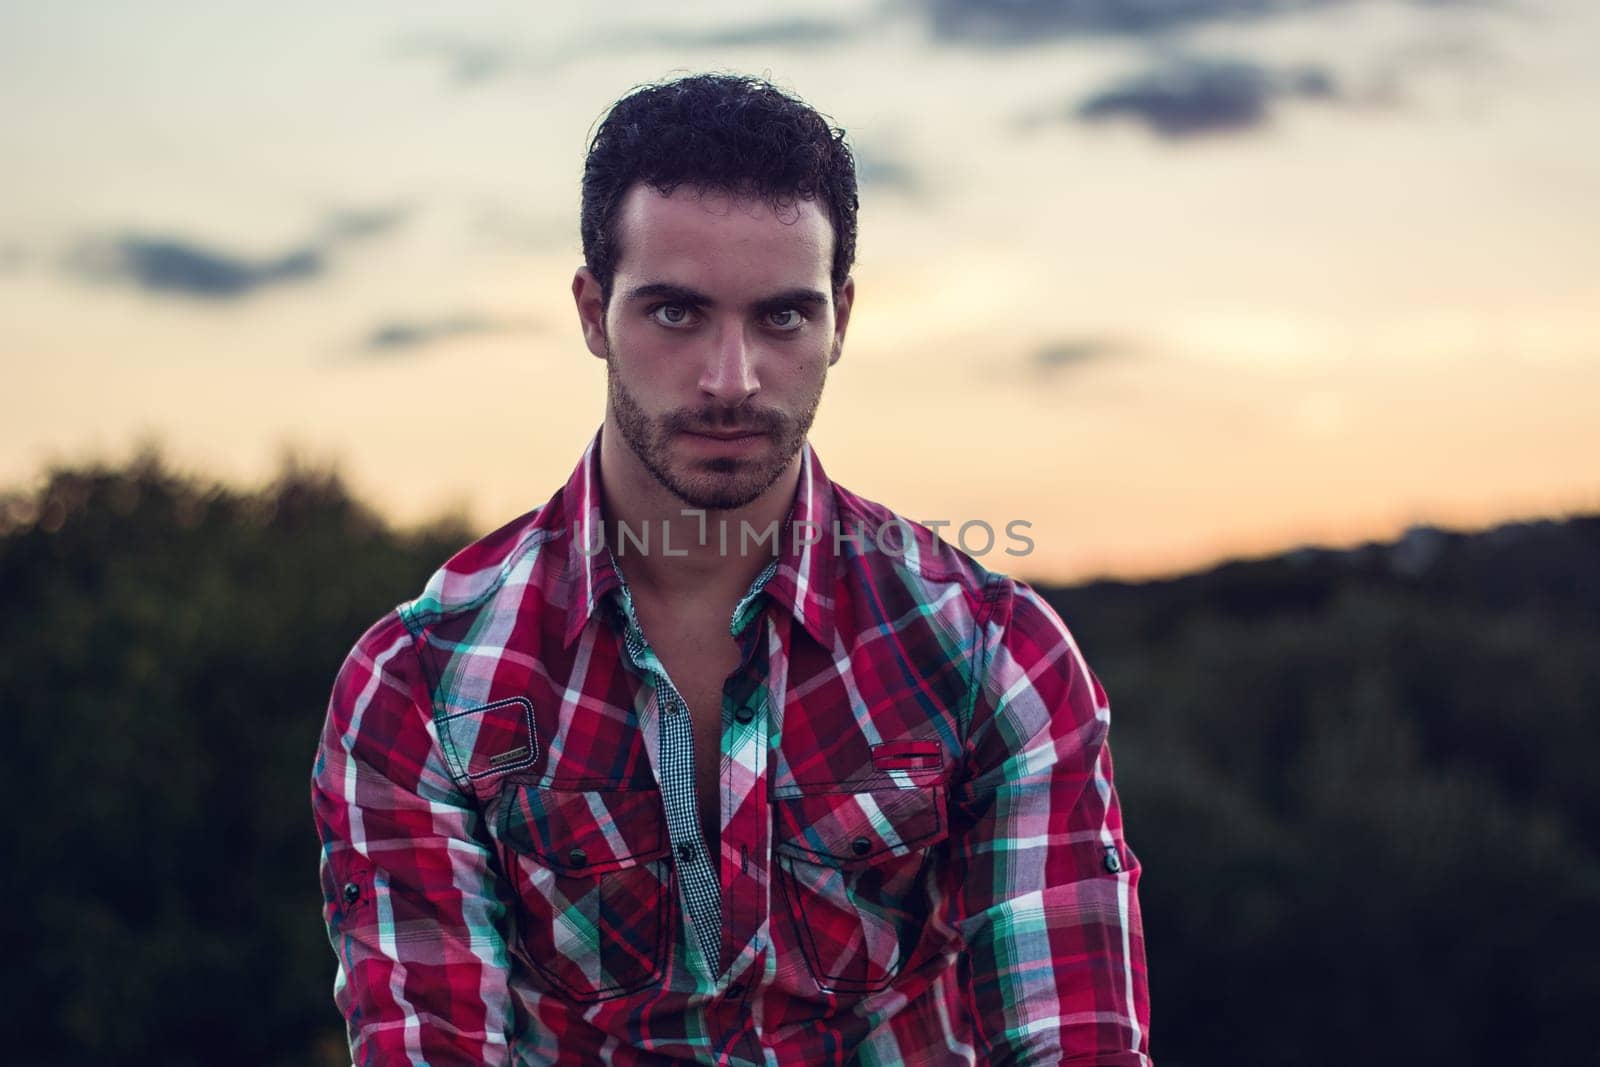 Man in red and green plaid shirt by artofphoto